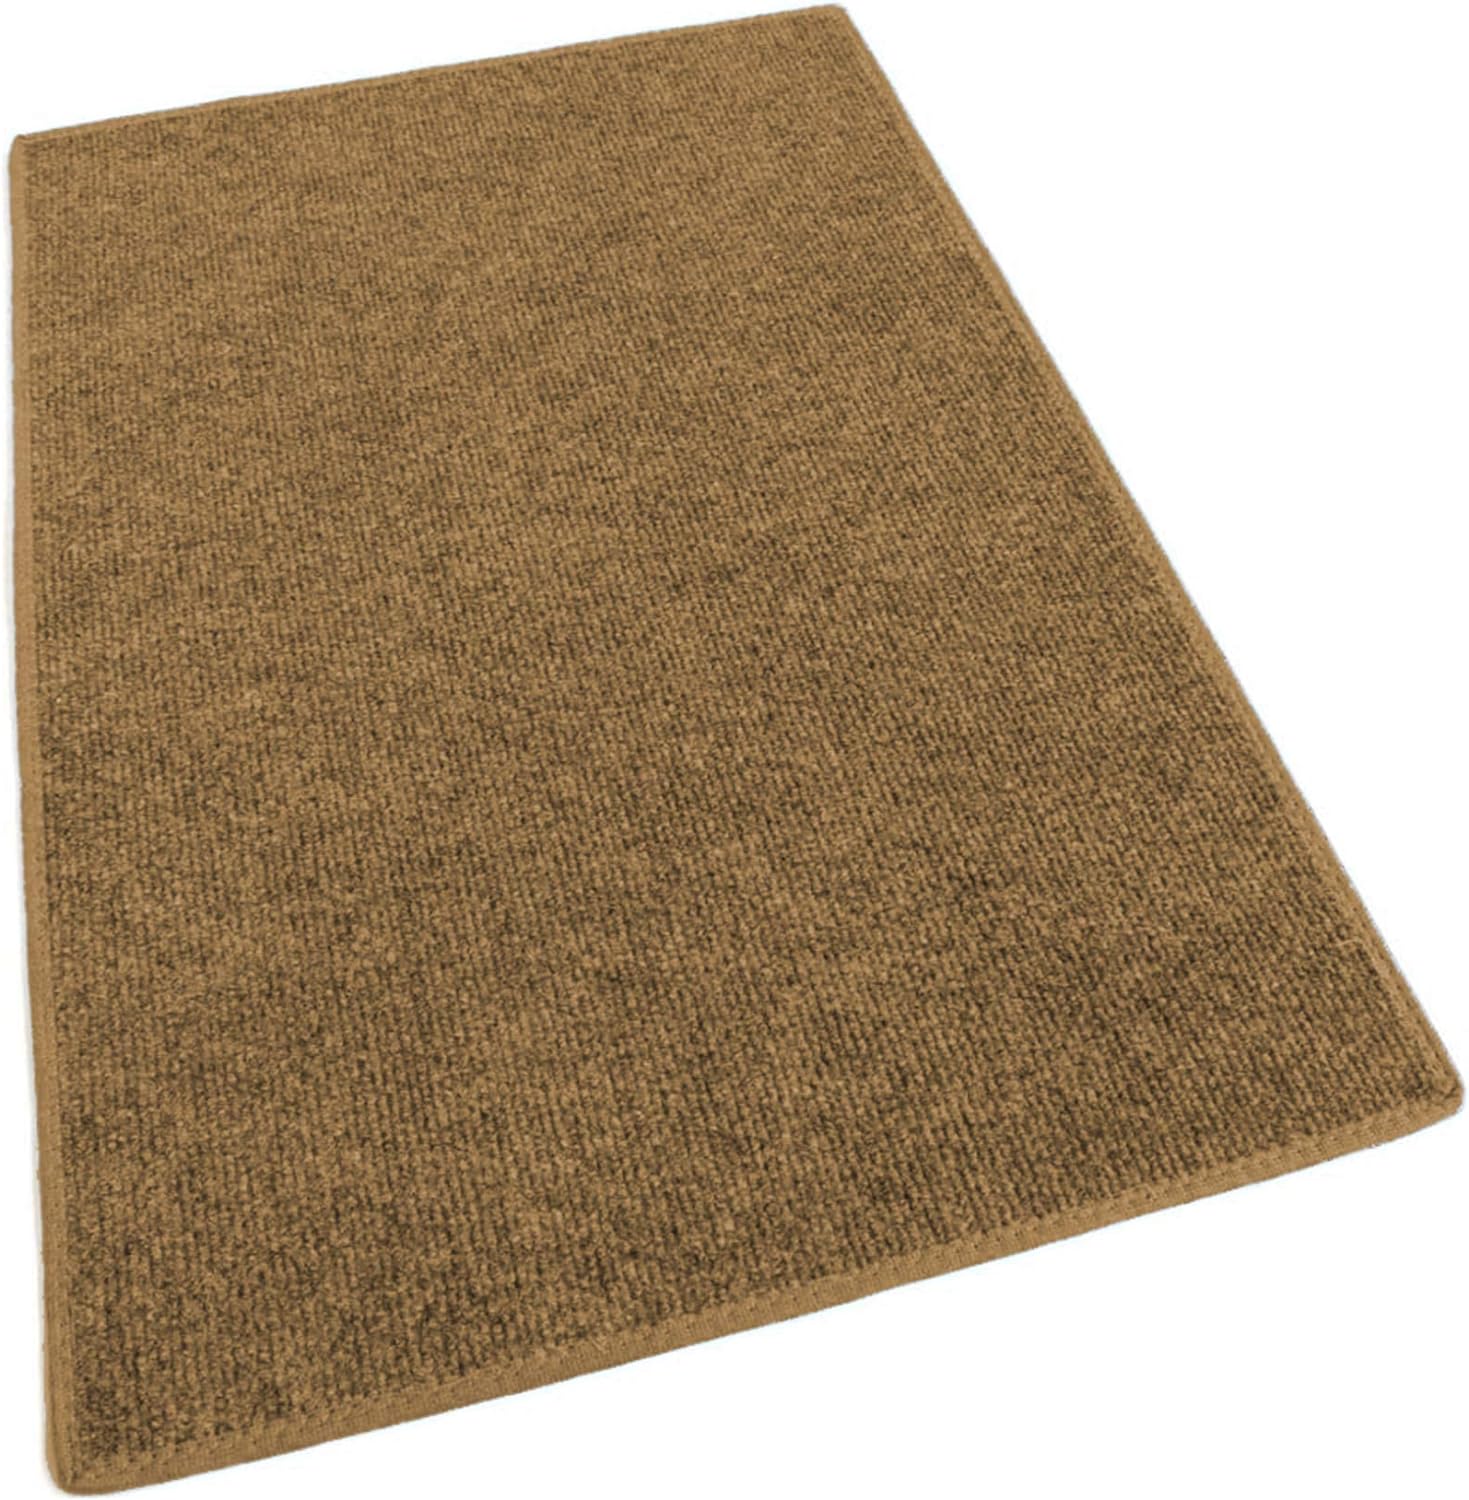 Koeckritz Rugs Winter wheat Red Indoor/Outdoor Carpet Patio & Pool Area Rugs Runners and Doormats - Easy Maintenance - Just Hose Off & Dry! 